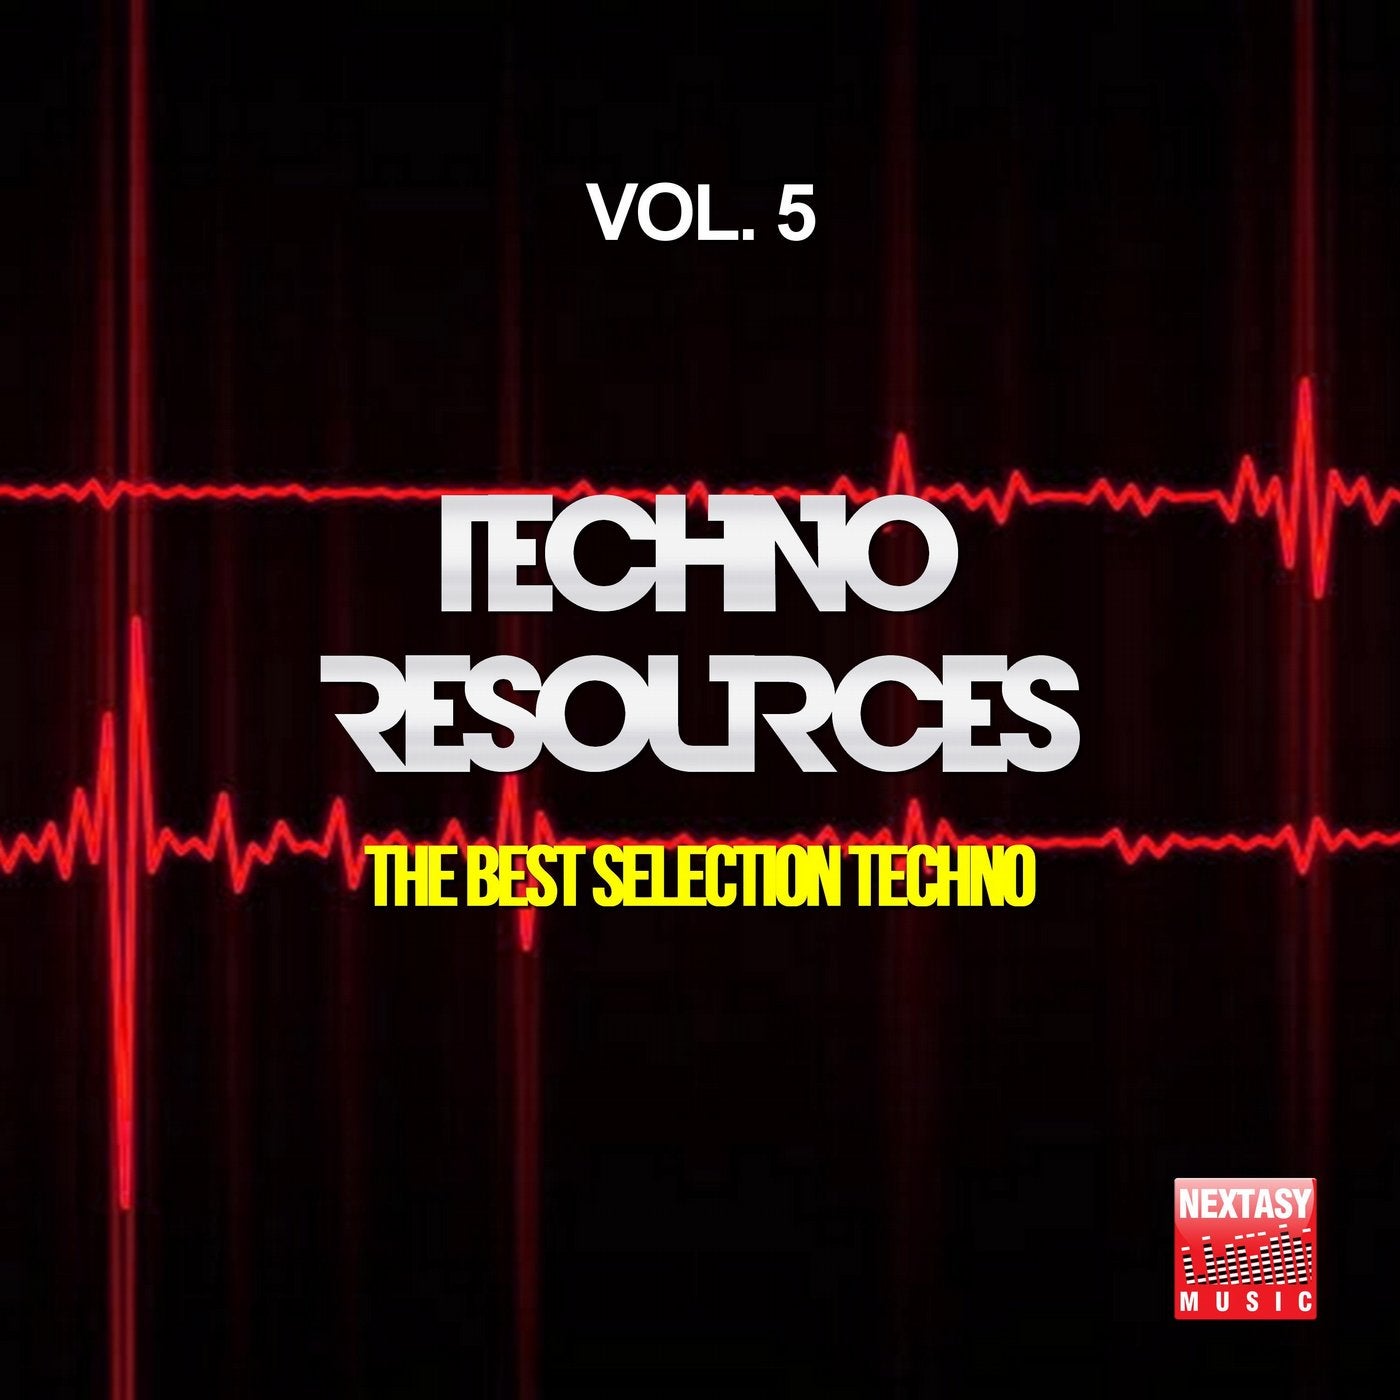 Techno Resources, Vol. 5 (The Best Selection Techno)